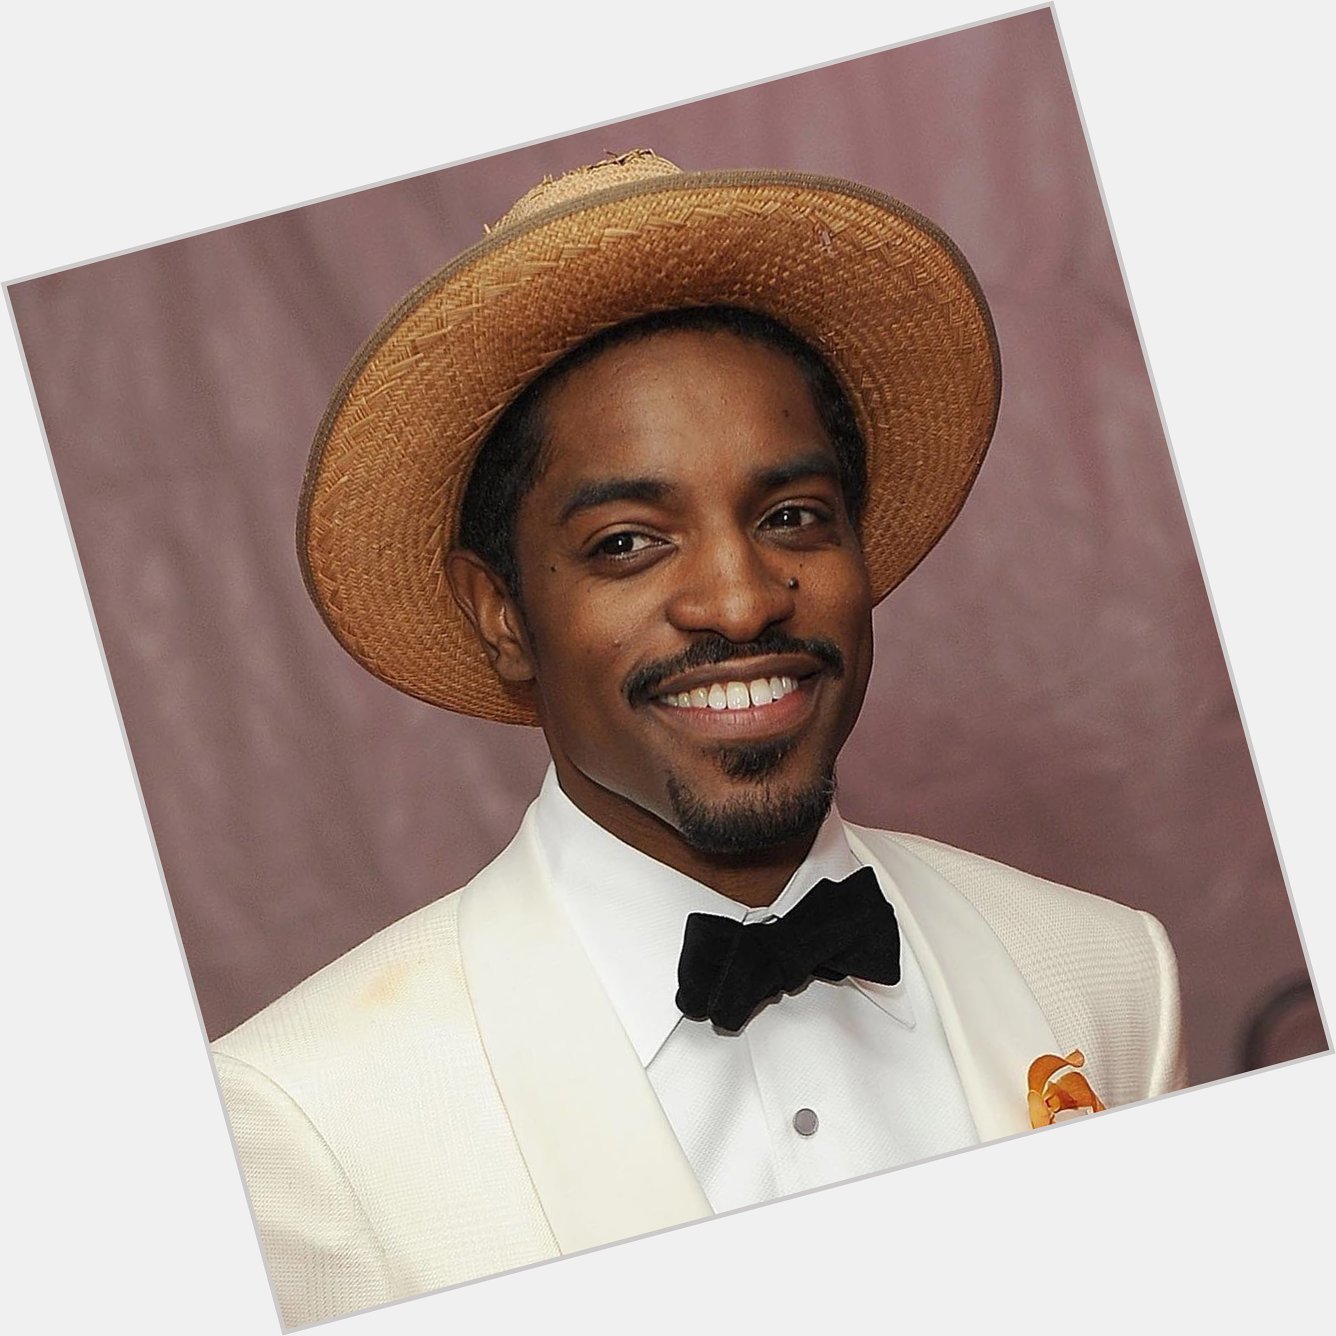 Happy Birthday goes out to Andre 3000! He turned 42 today!    WORLDSTARHIPHOP (WORLDSTAR) May 27, 2017  